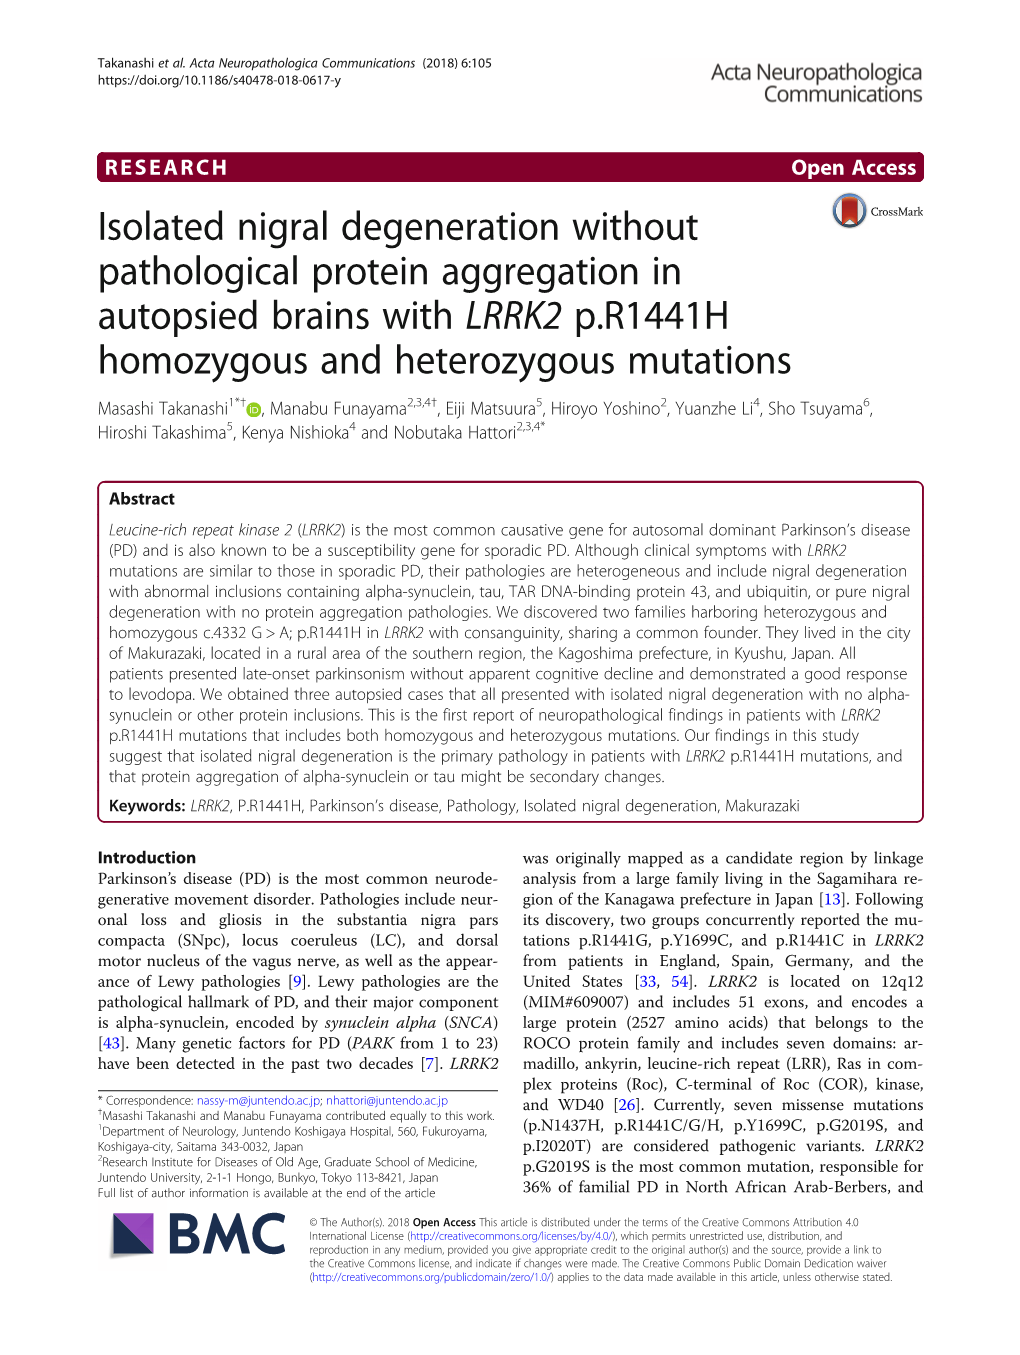 Isolated Nigral Degeneration Without Pathological Protein Aggregation In